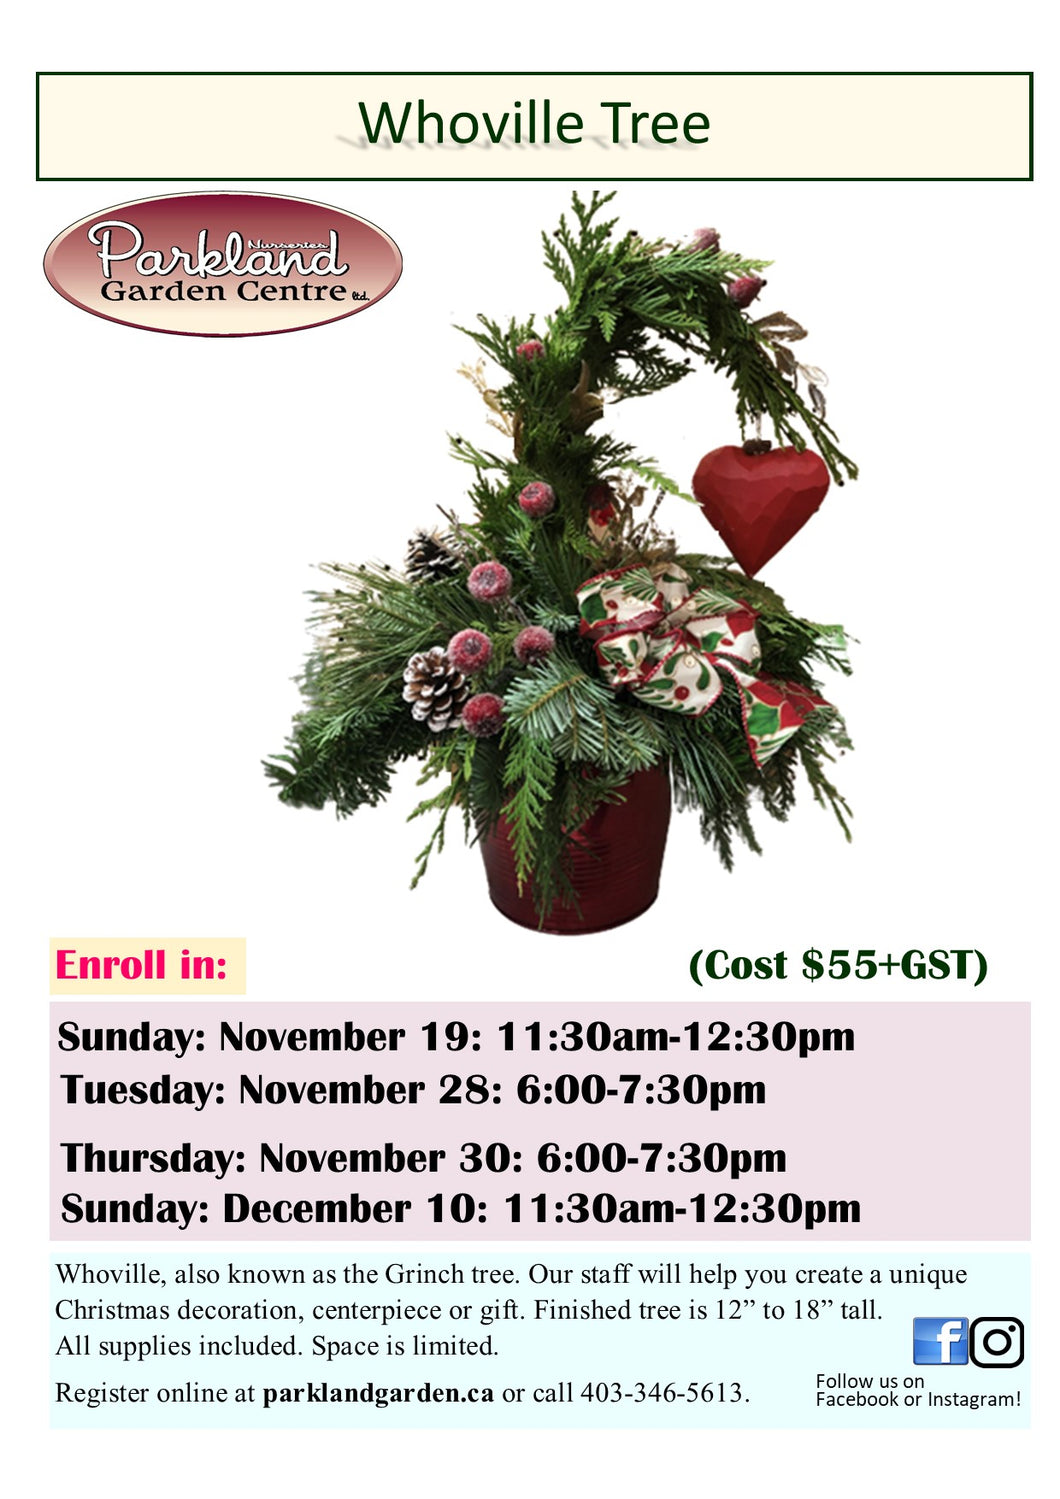 Whoville Tree Workshop: Tuesday, Nov.28 from 6:00 to 7:30pm